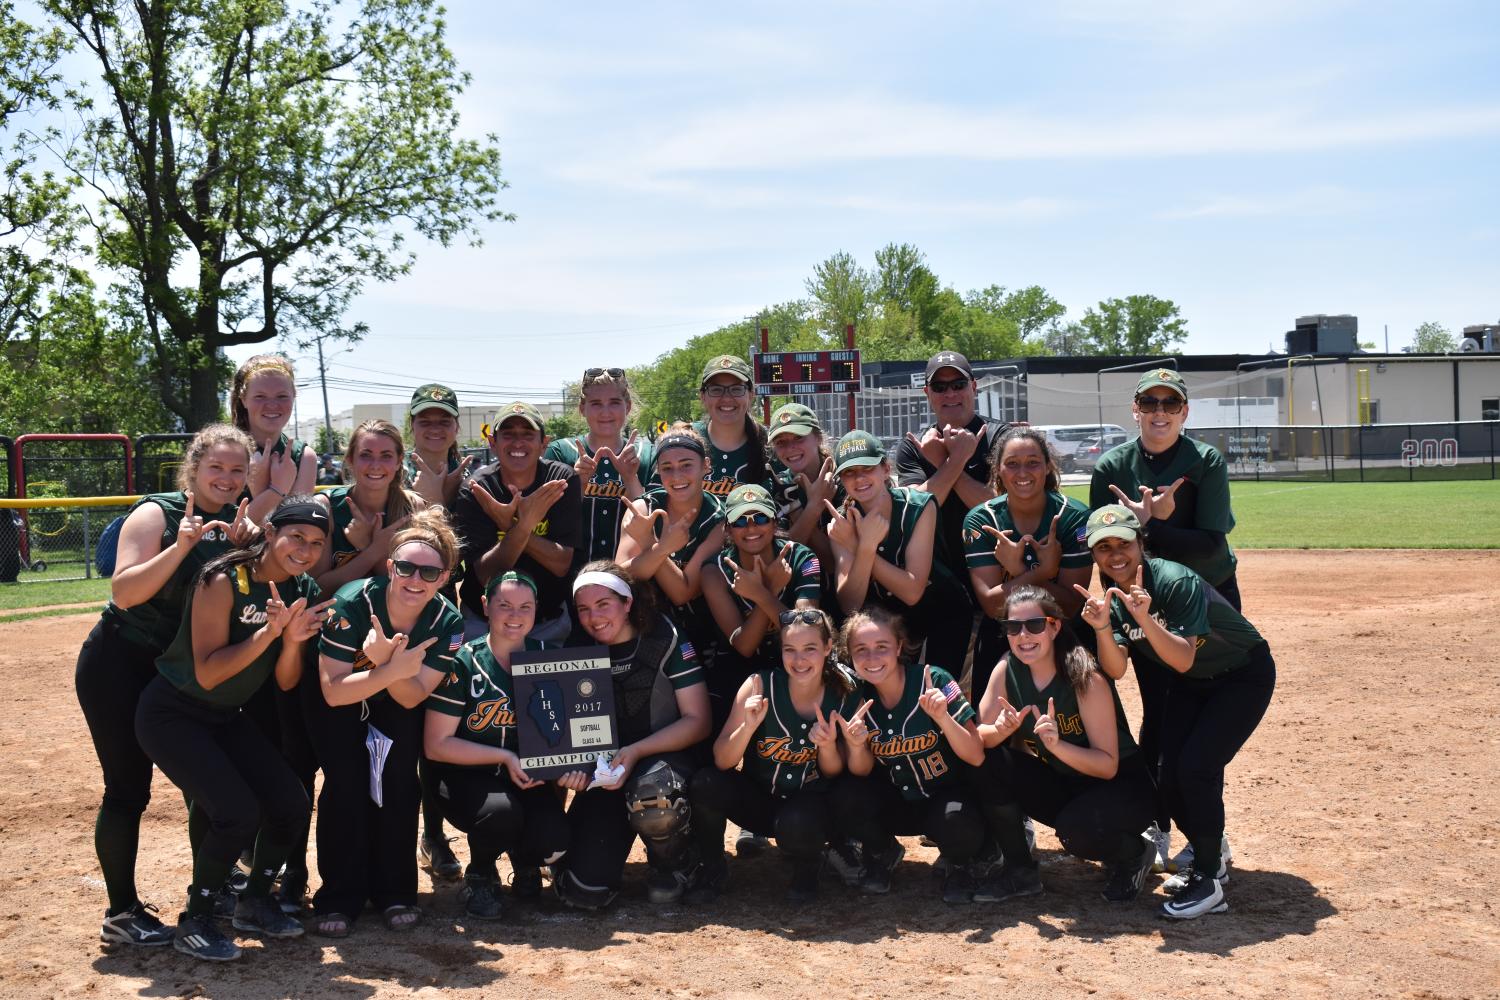 Girls Varsity Softball after defeating York 7-2 to take home the regional title. They followed the victory with a

narrow 8-7 loss to Whitney Young but still advanced to sectionals for the first time in recent team history. (Greif Family)